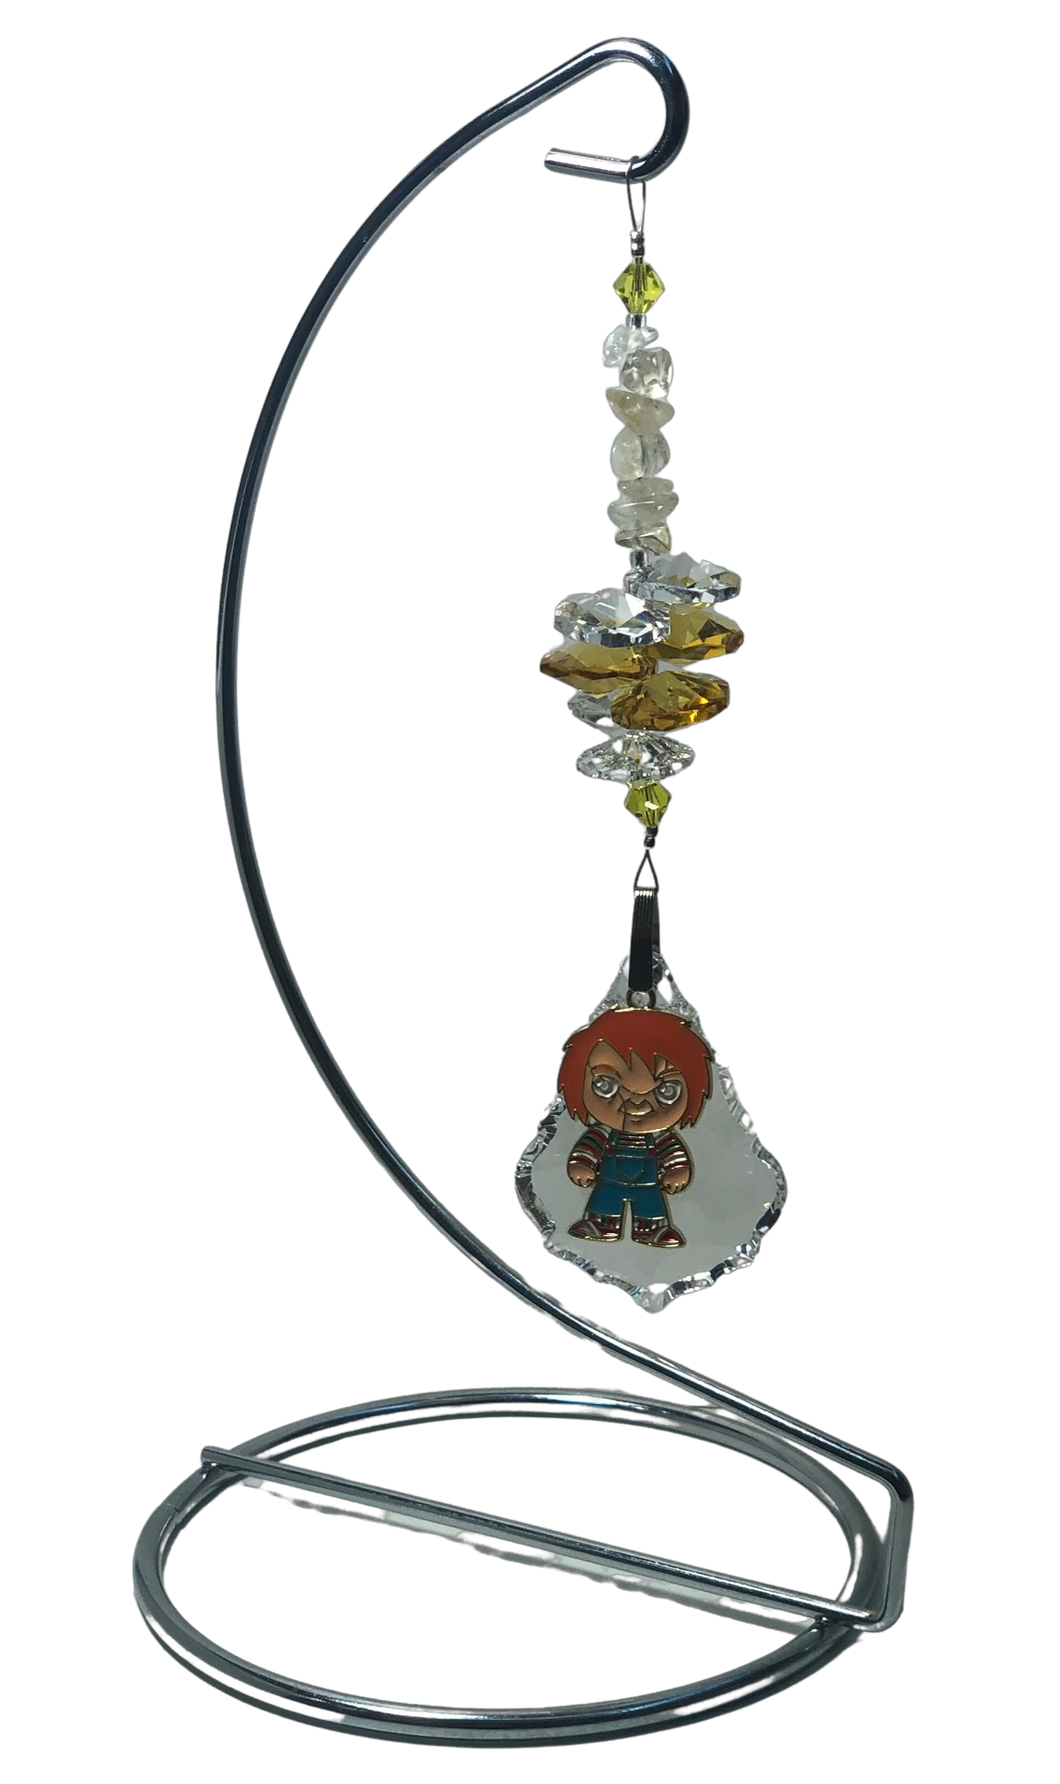 Chucky crystal suncatcher is decorated with citrine gemstones and come on this amazing large stand